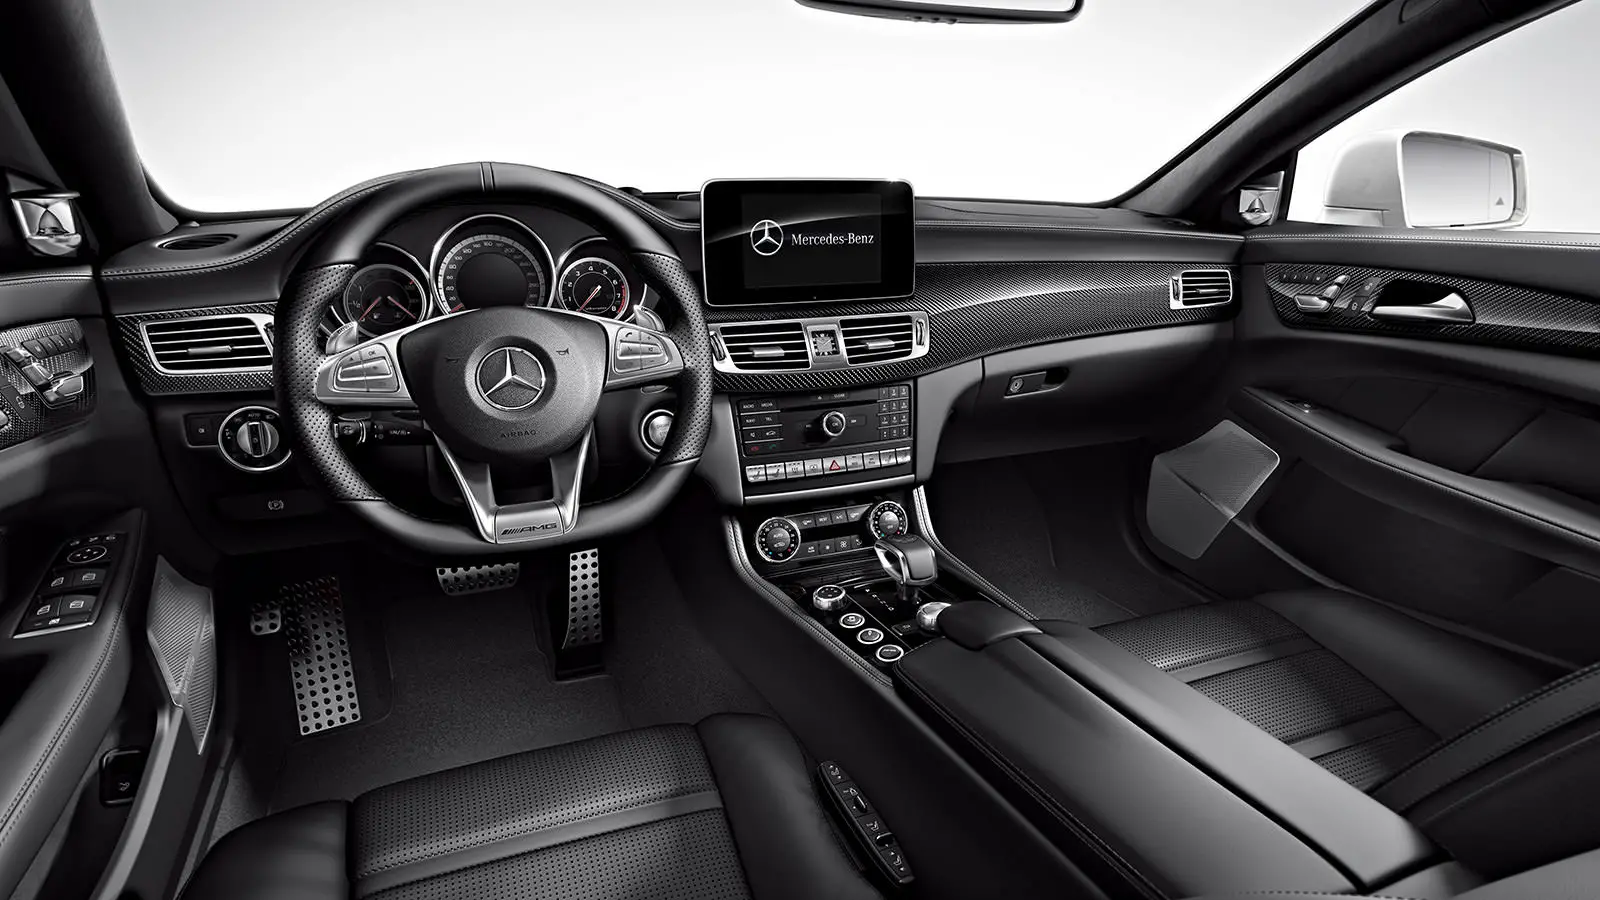 Mercedes Benz Amg Cls 63 Interior Image Gallery Pictures